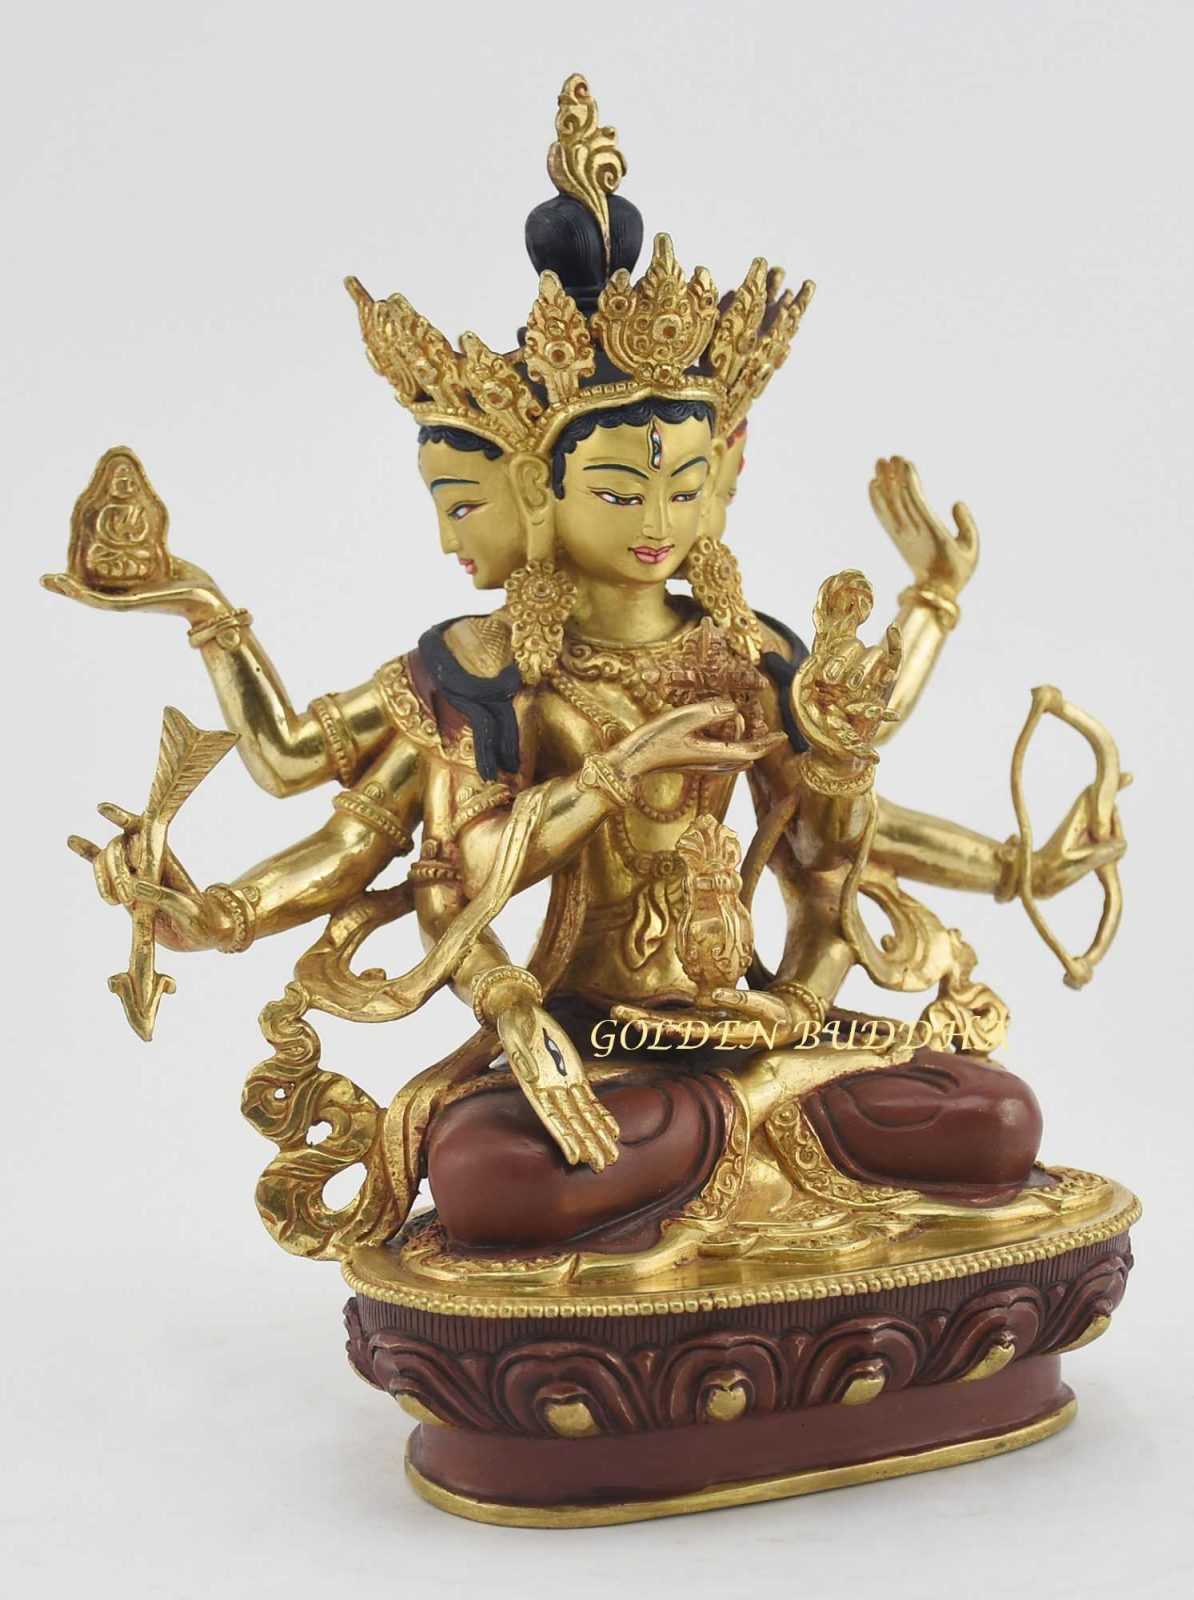 Gold Gilded 9.25" Usnisavijaya Sculpture, Gold Painted Face, Finely Hand Carved Details - Right